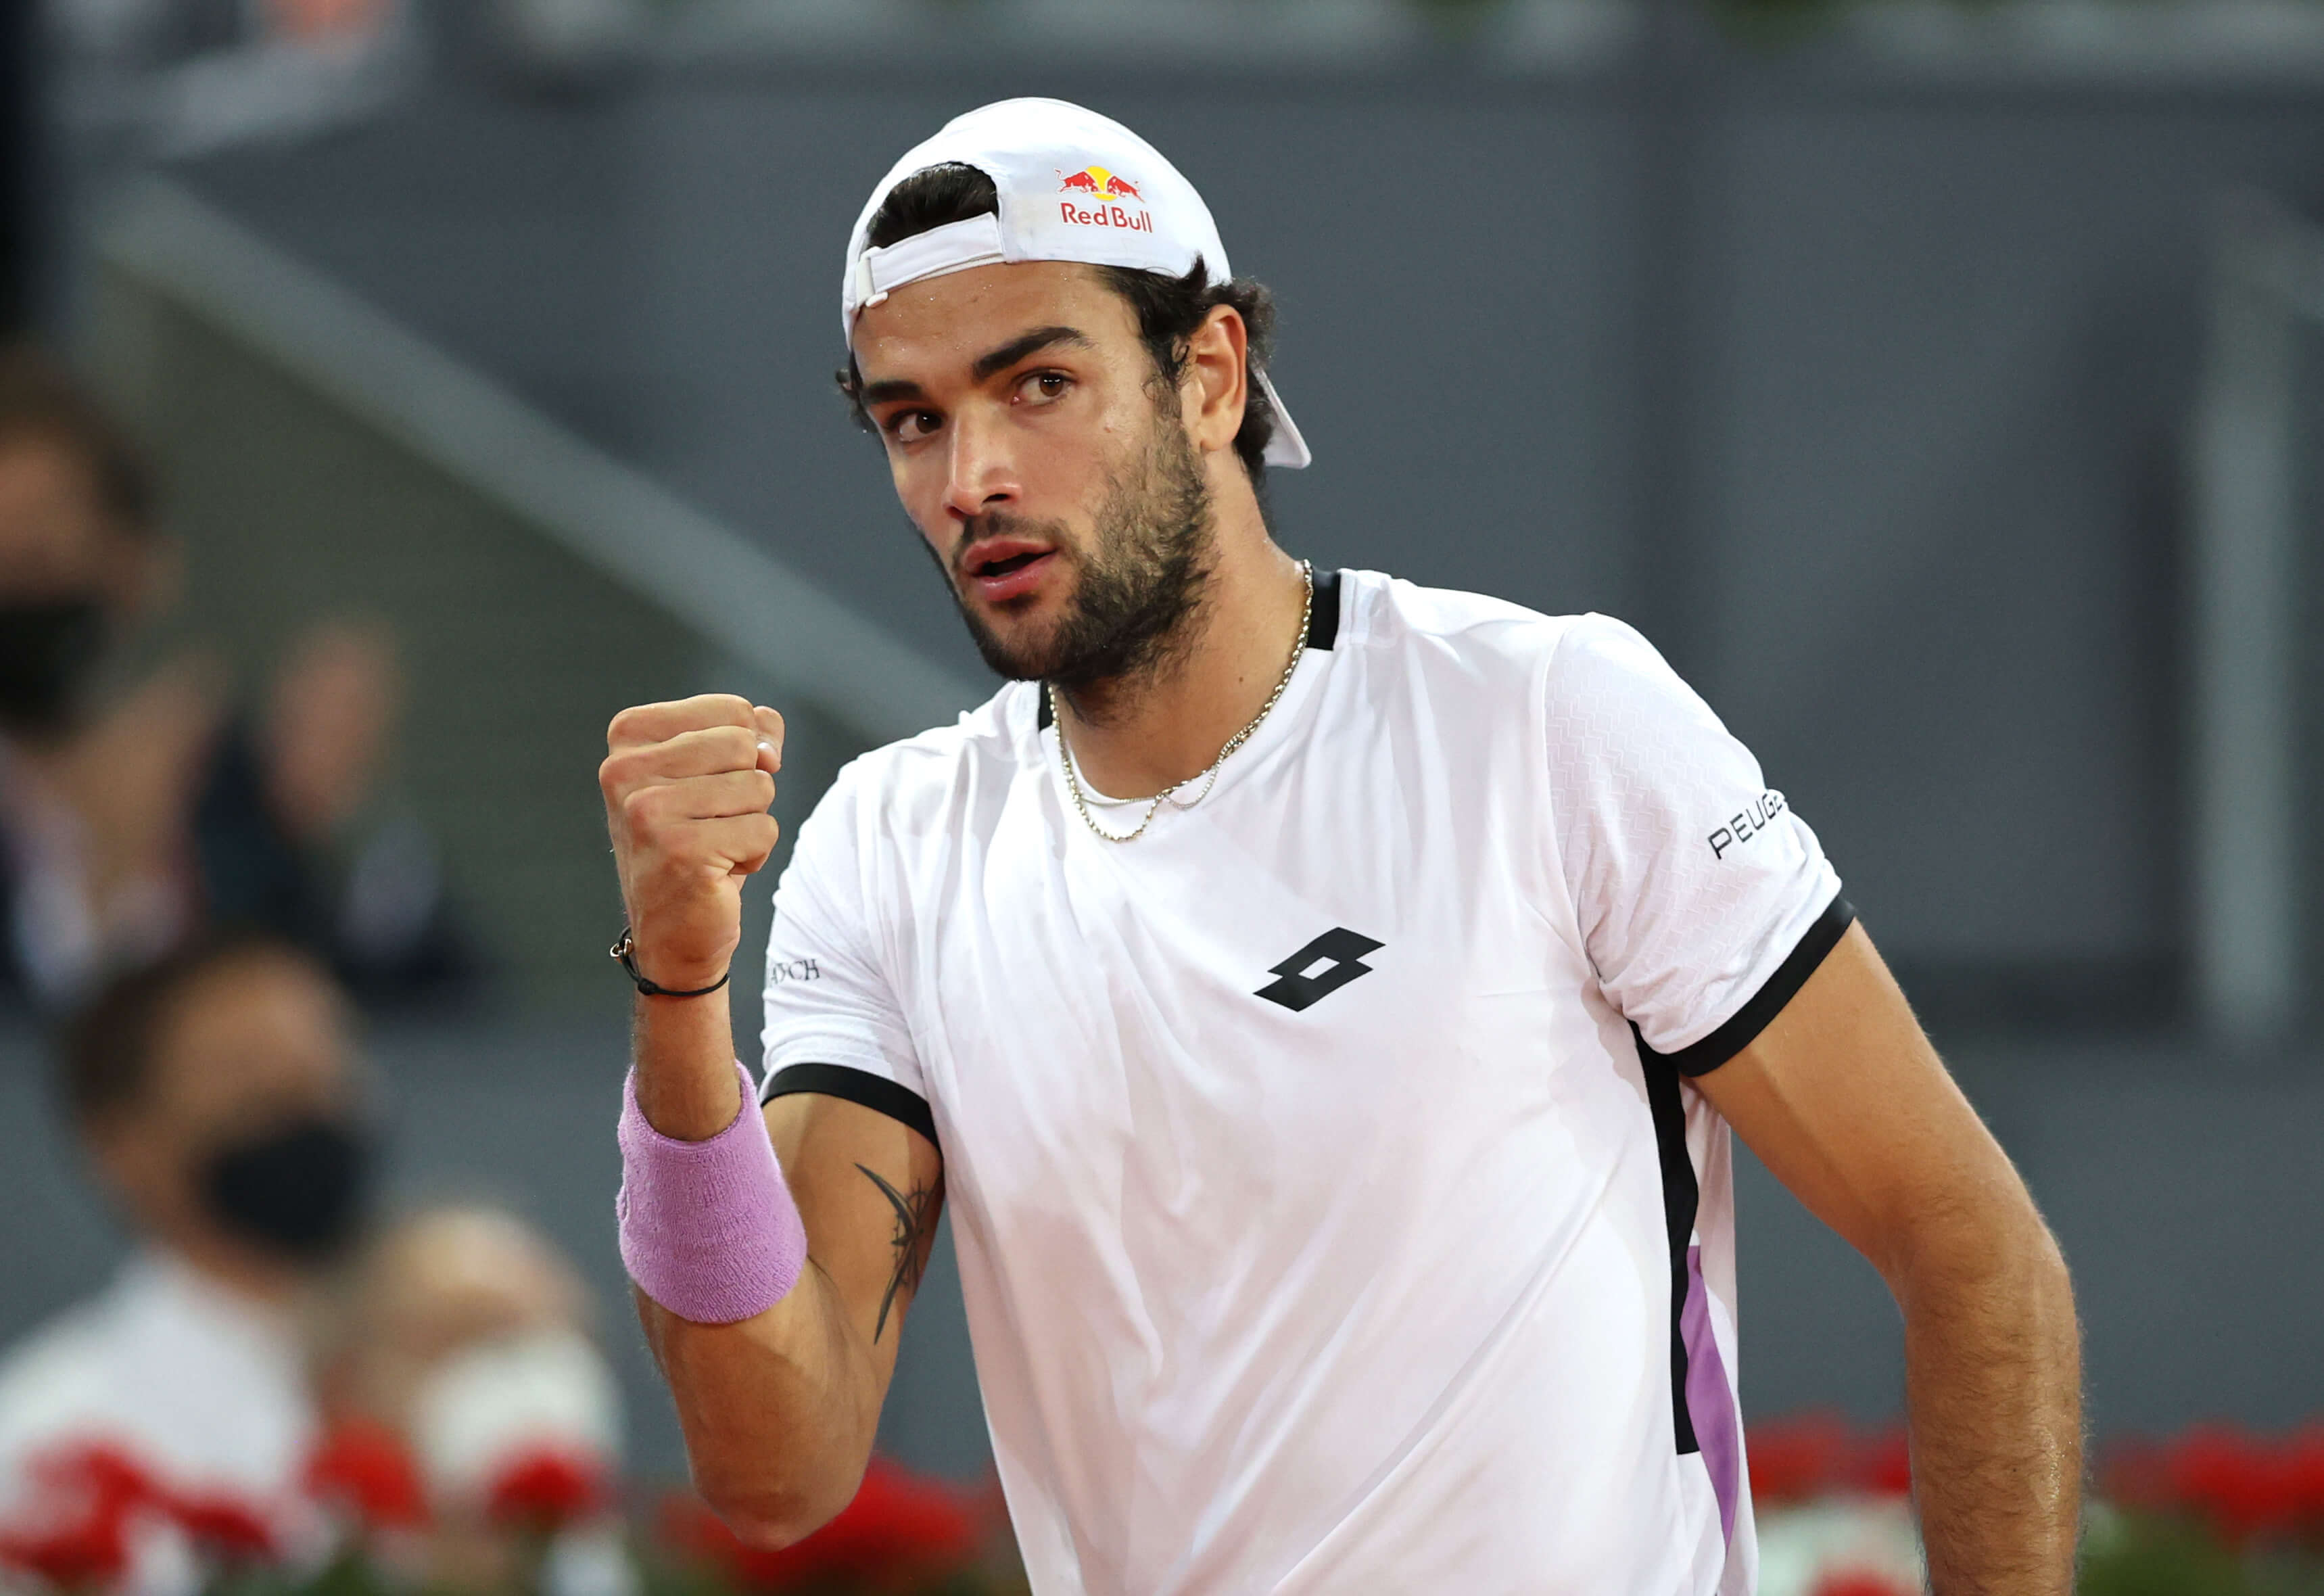 Matteo Berrettini and Jannik Sinner to play cinch Championships for first time